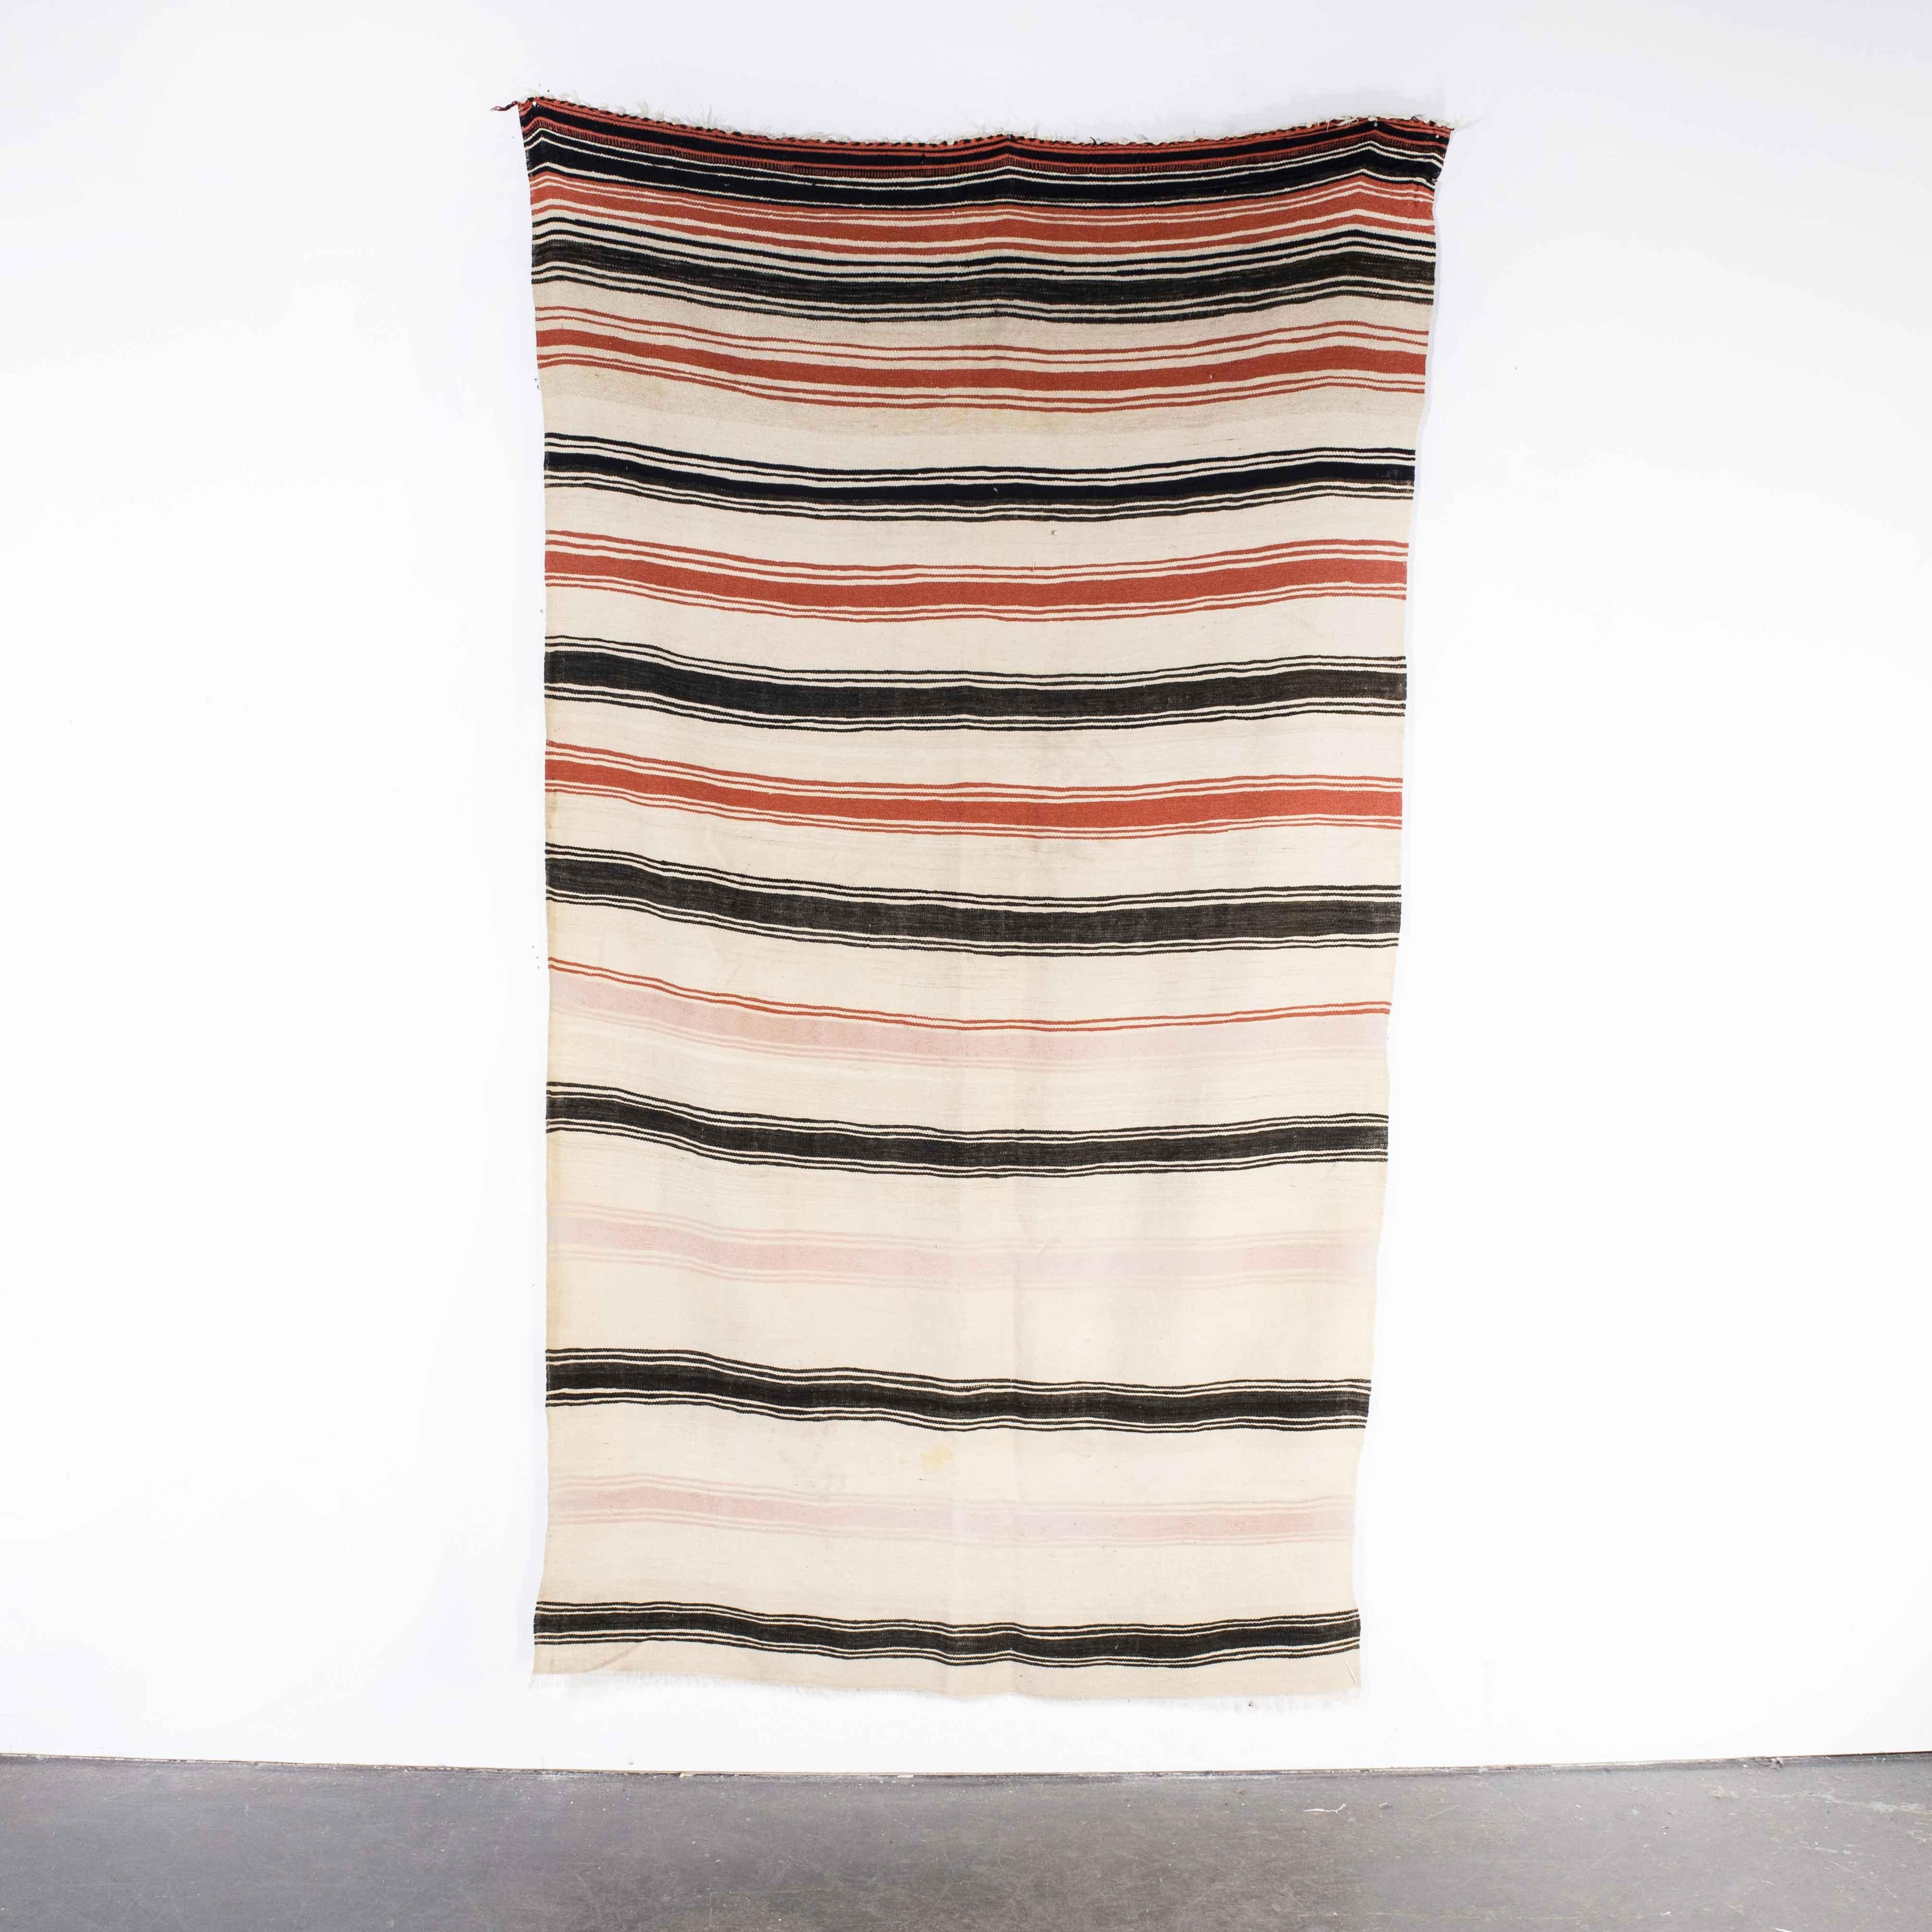 Vintage Berber Gradient Stripe Hanbel Rug
Vintage Berber Gradient Stripe Hanbel Rug. These are flat-woven rugs (Hanbel in Arabic) which are light in weight due to the lack of pile. They are often used on floors in hotter countries as they are easy